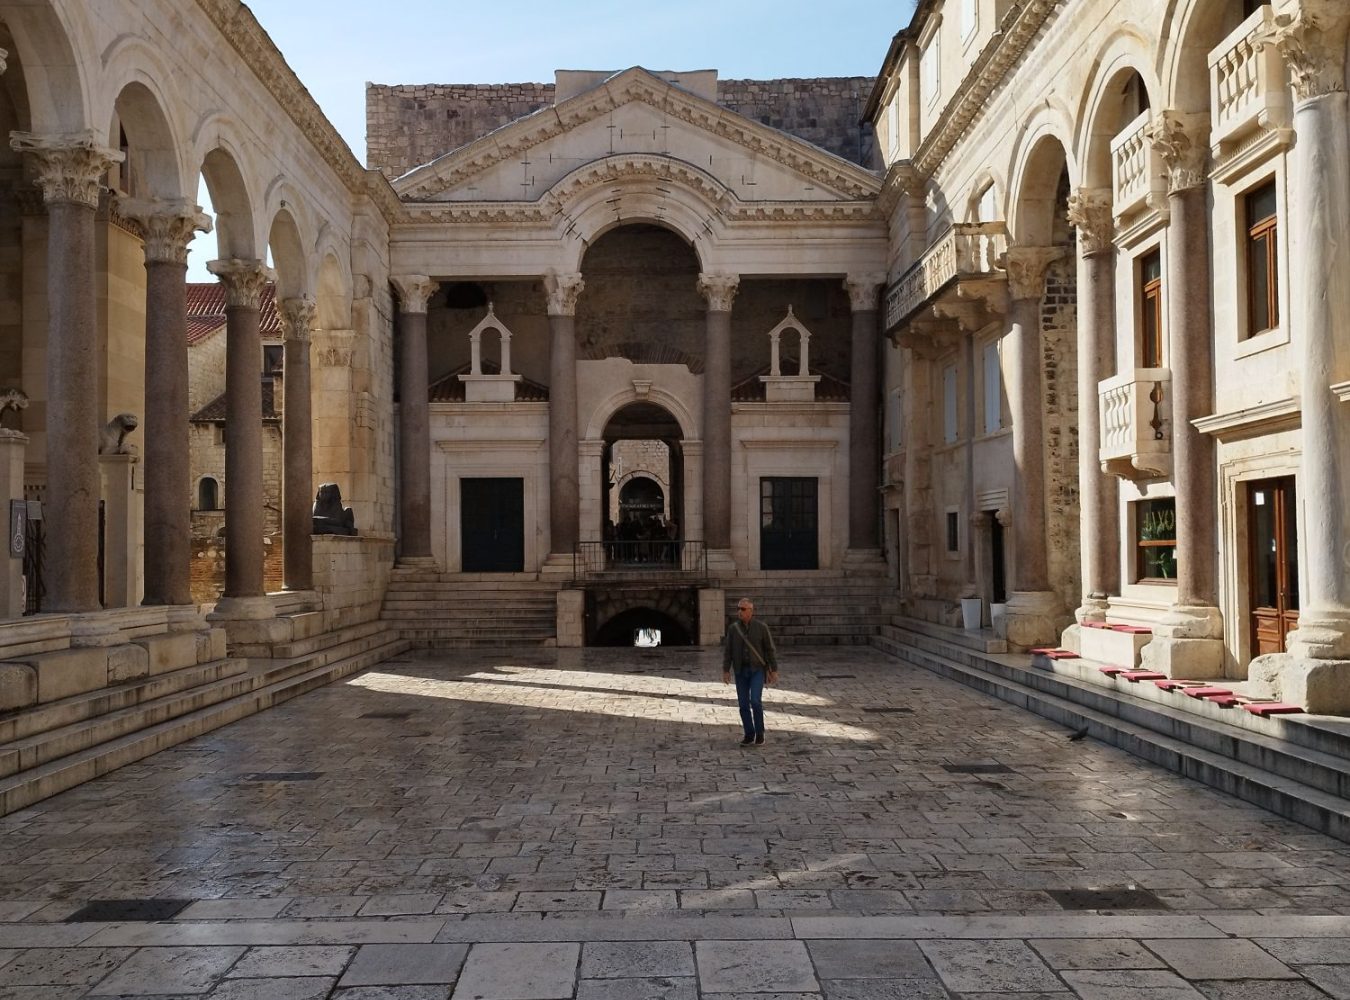 Morning view of a Peristil in Split in a Diocletian's palace